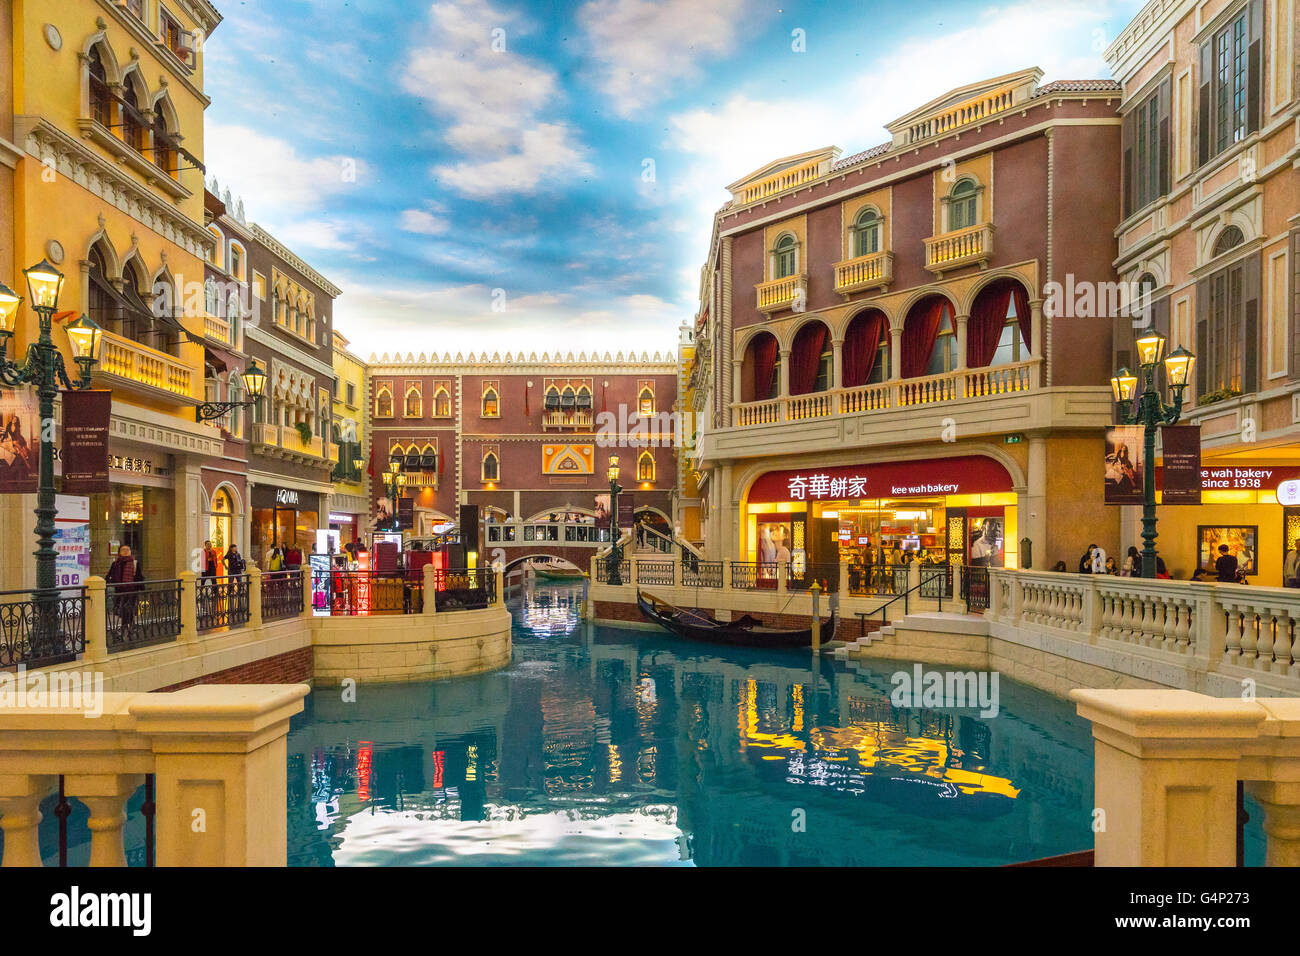 Macau, China - March 12, 2016: : The Venetian Macao Resort Hotel is one of the world's top gambling destinations. Stock Photo